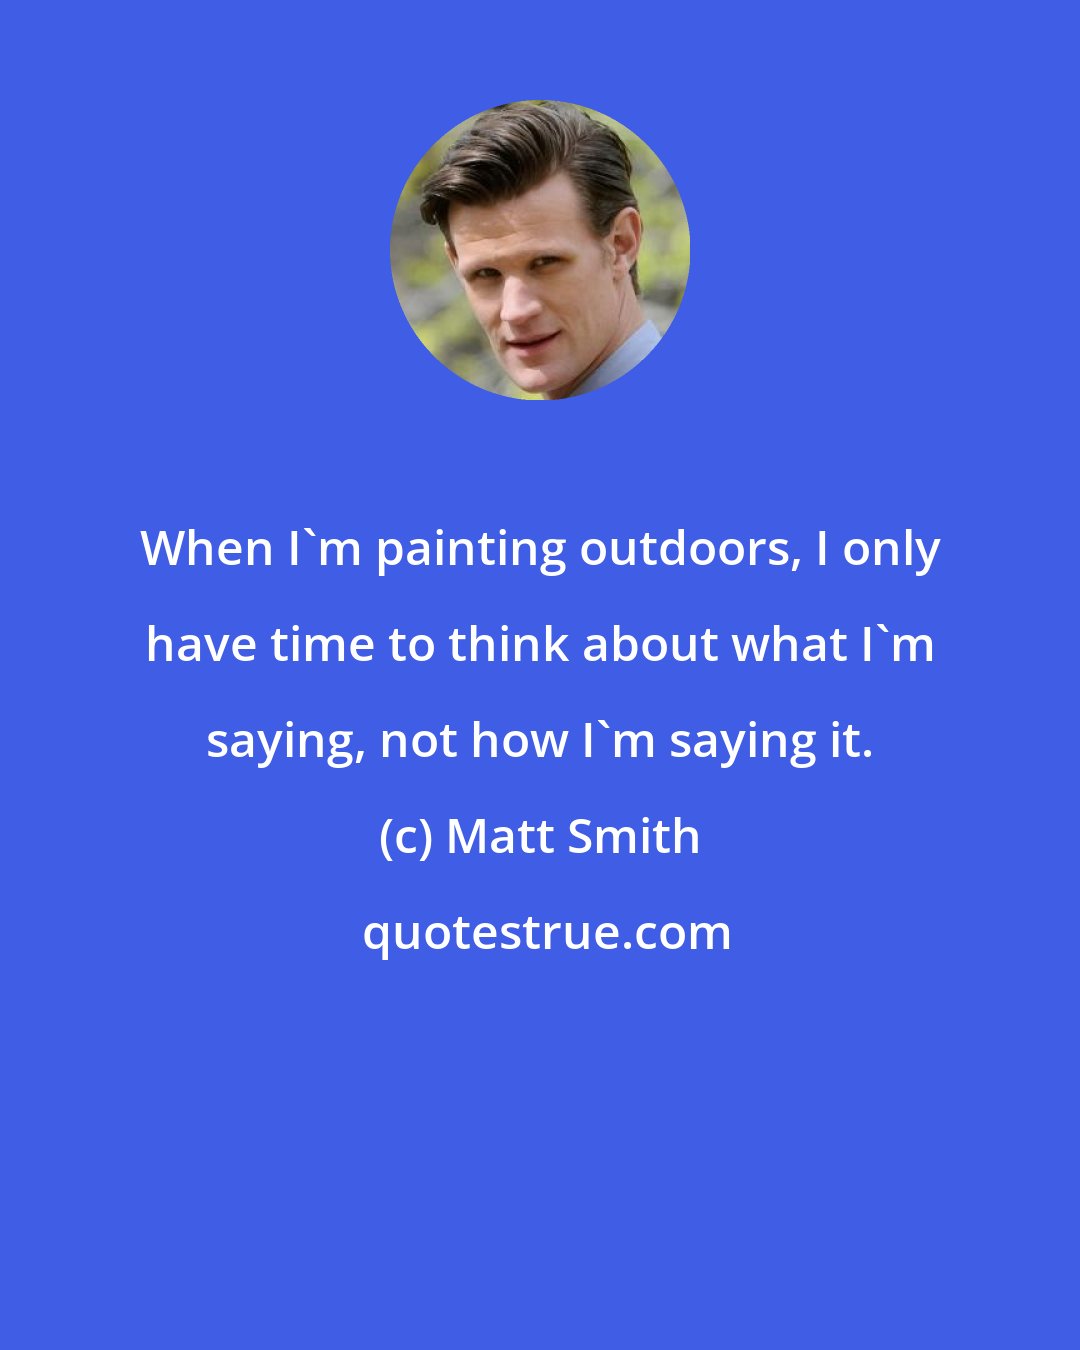 Matt Smith: When I'm painting outdoors, I only have time to think about what I'm saying, not how I'm saying it.